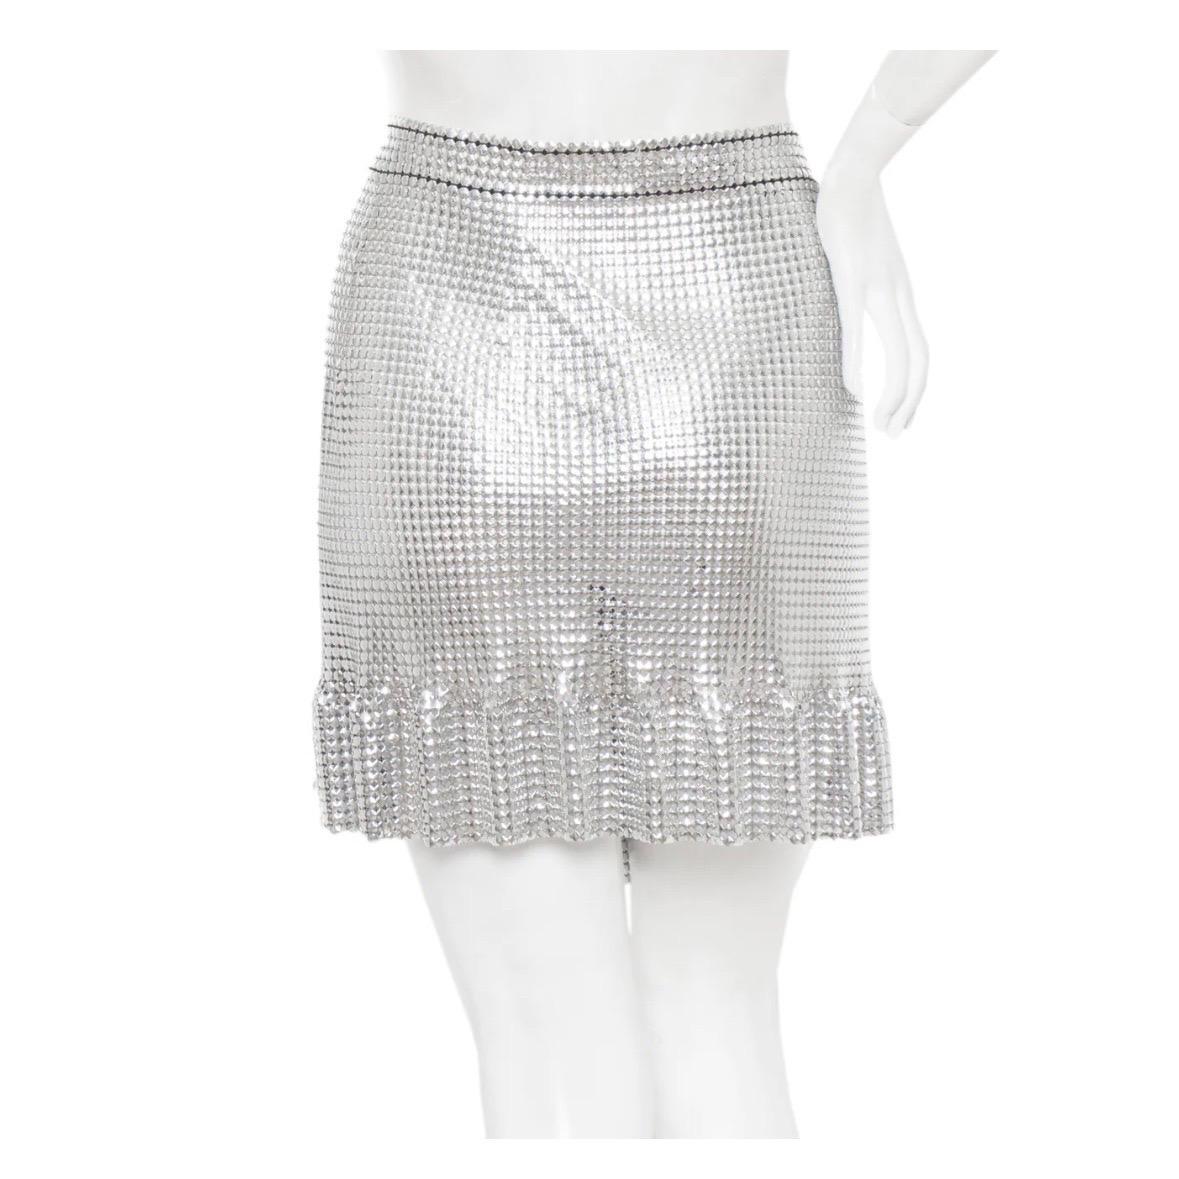 Silver chainmaille mini skirt by Paco Rabanne
2016 Fall Collection
Wrap silhouette with front snap closure
Banded waist 
Ruffled hem
Gripped rubber on waist for extra support
Unlined
Made in France
Condition: excellent
Size/Measurements